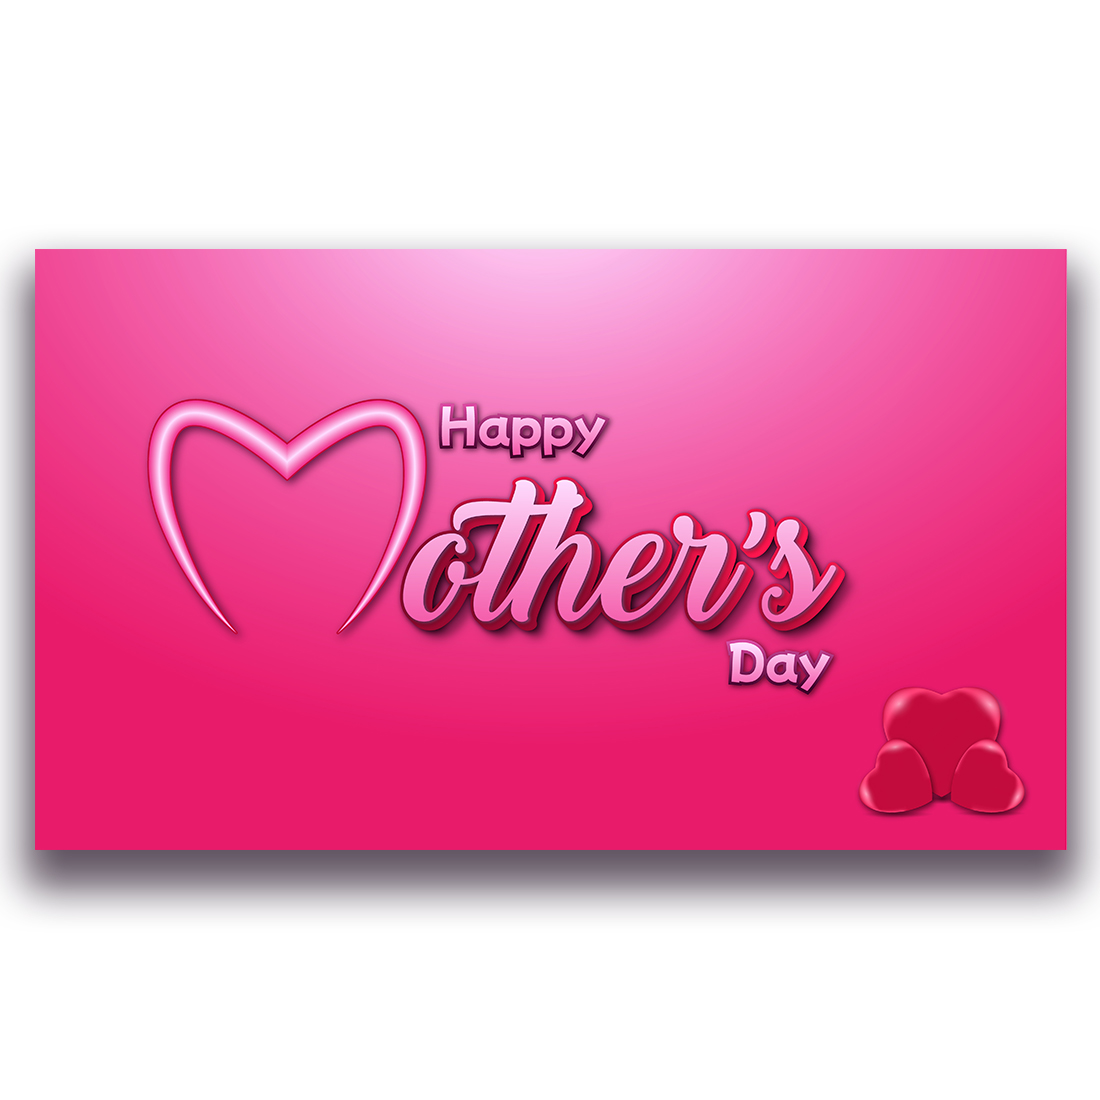 Happy mother's day greeting background design with 3D heart Shape preview image.